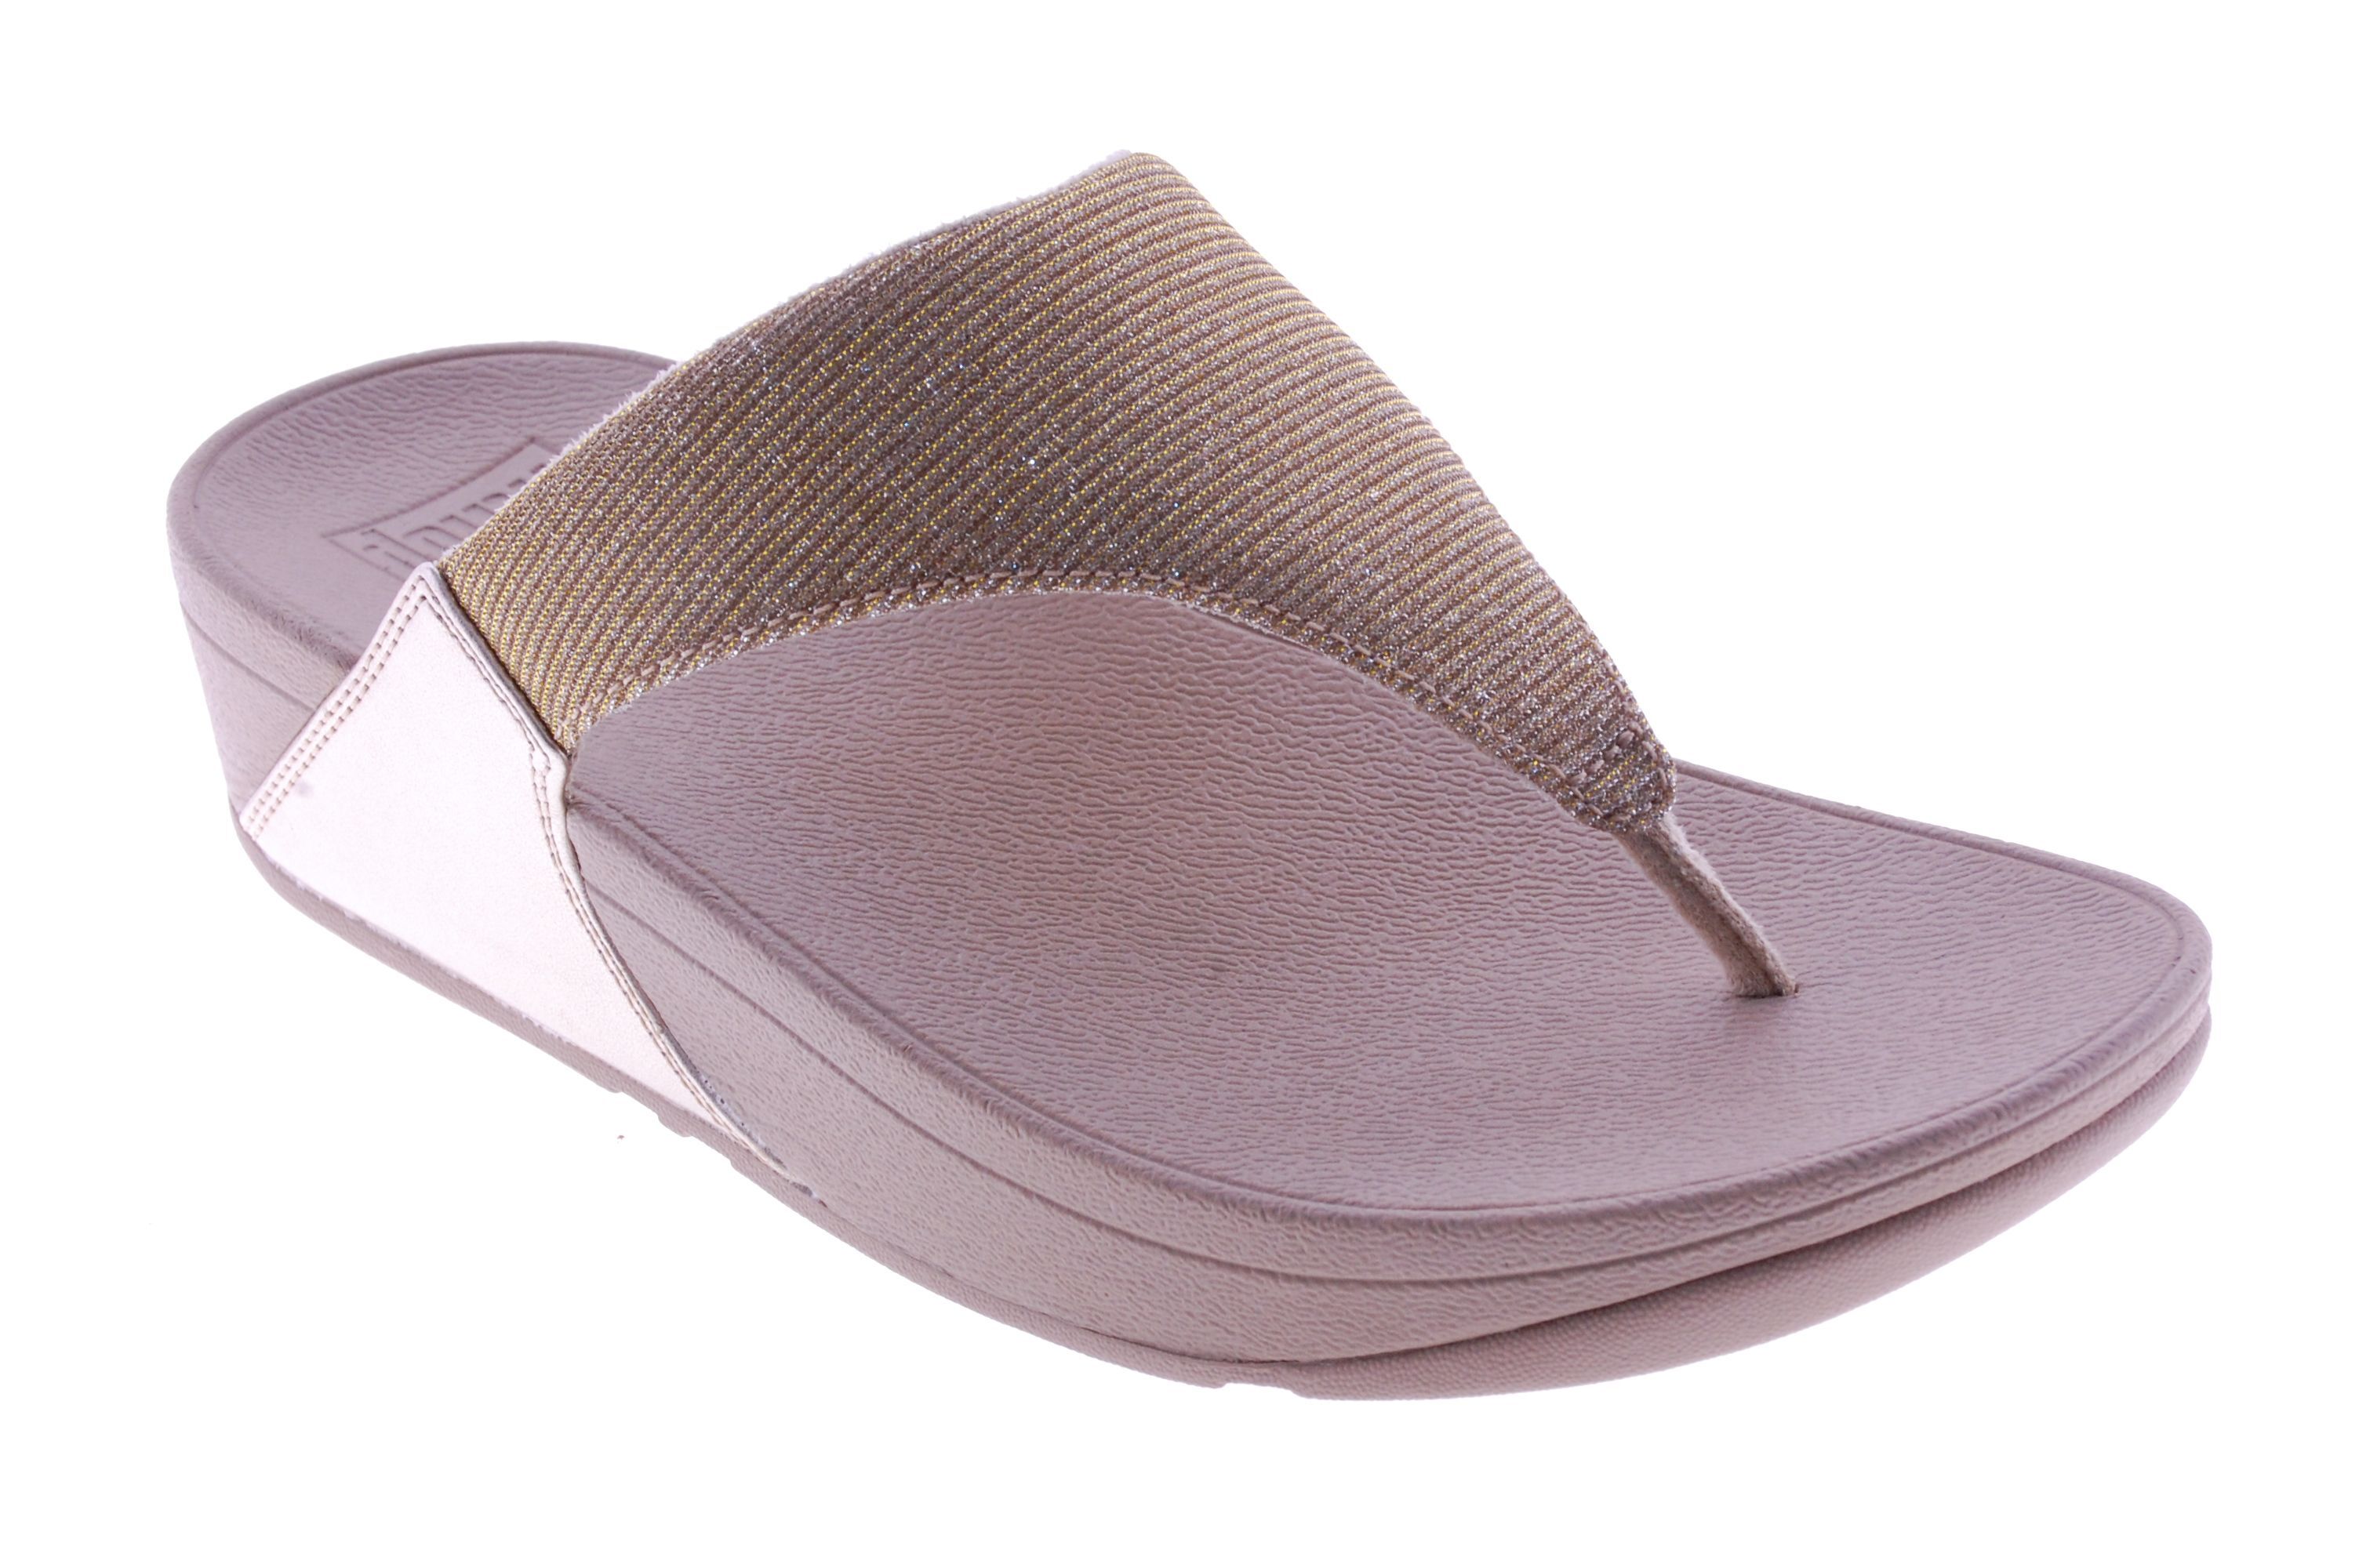 Fitflop - Muil - Metalic - Goud